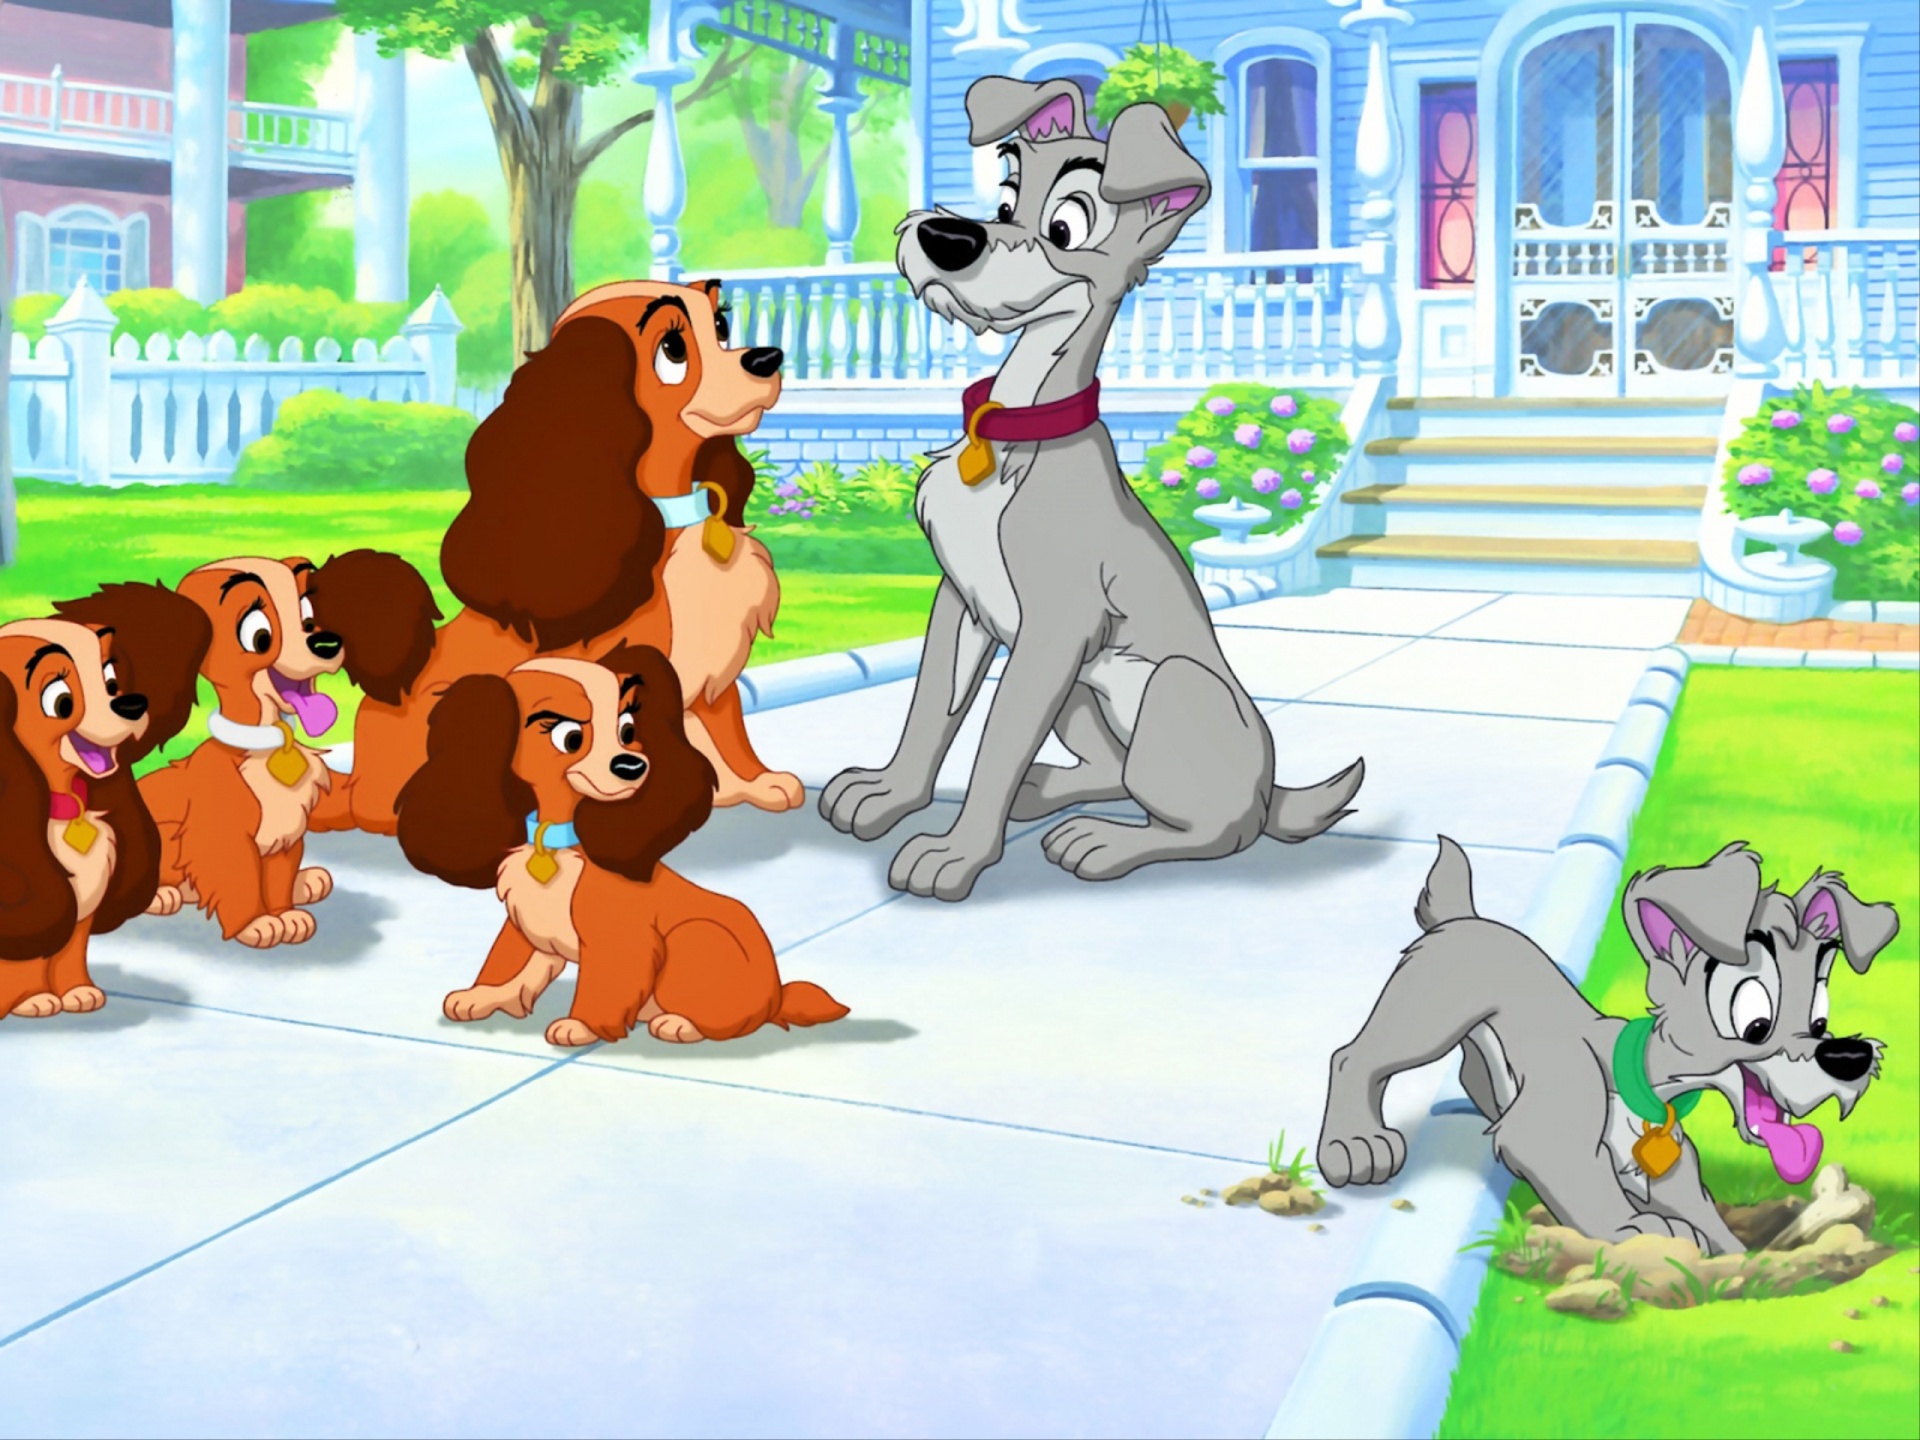 movie, lady and the tramp ii: scamp's adventure, annette (lady and the tramp), collette (lady and the tramp), danielle (lady and the tramp), lady (lady and the tramp), lady and the tramp, scamp (lady and the tramp), tramp (lady and the tramp)